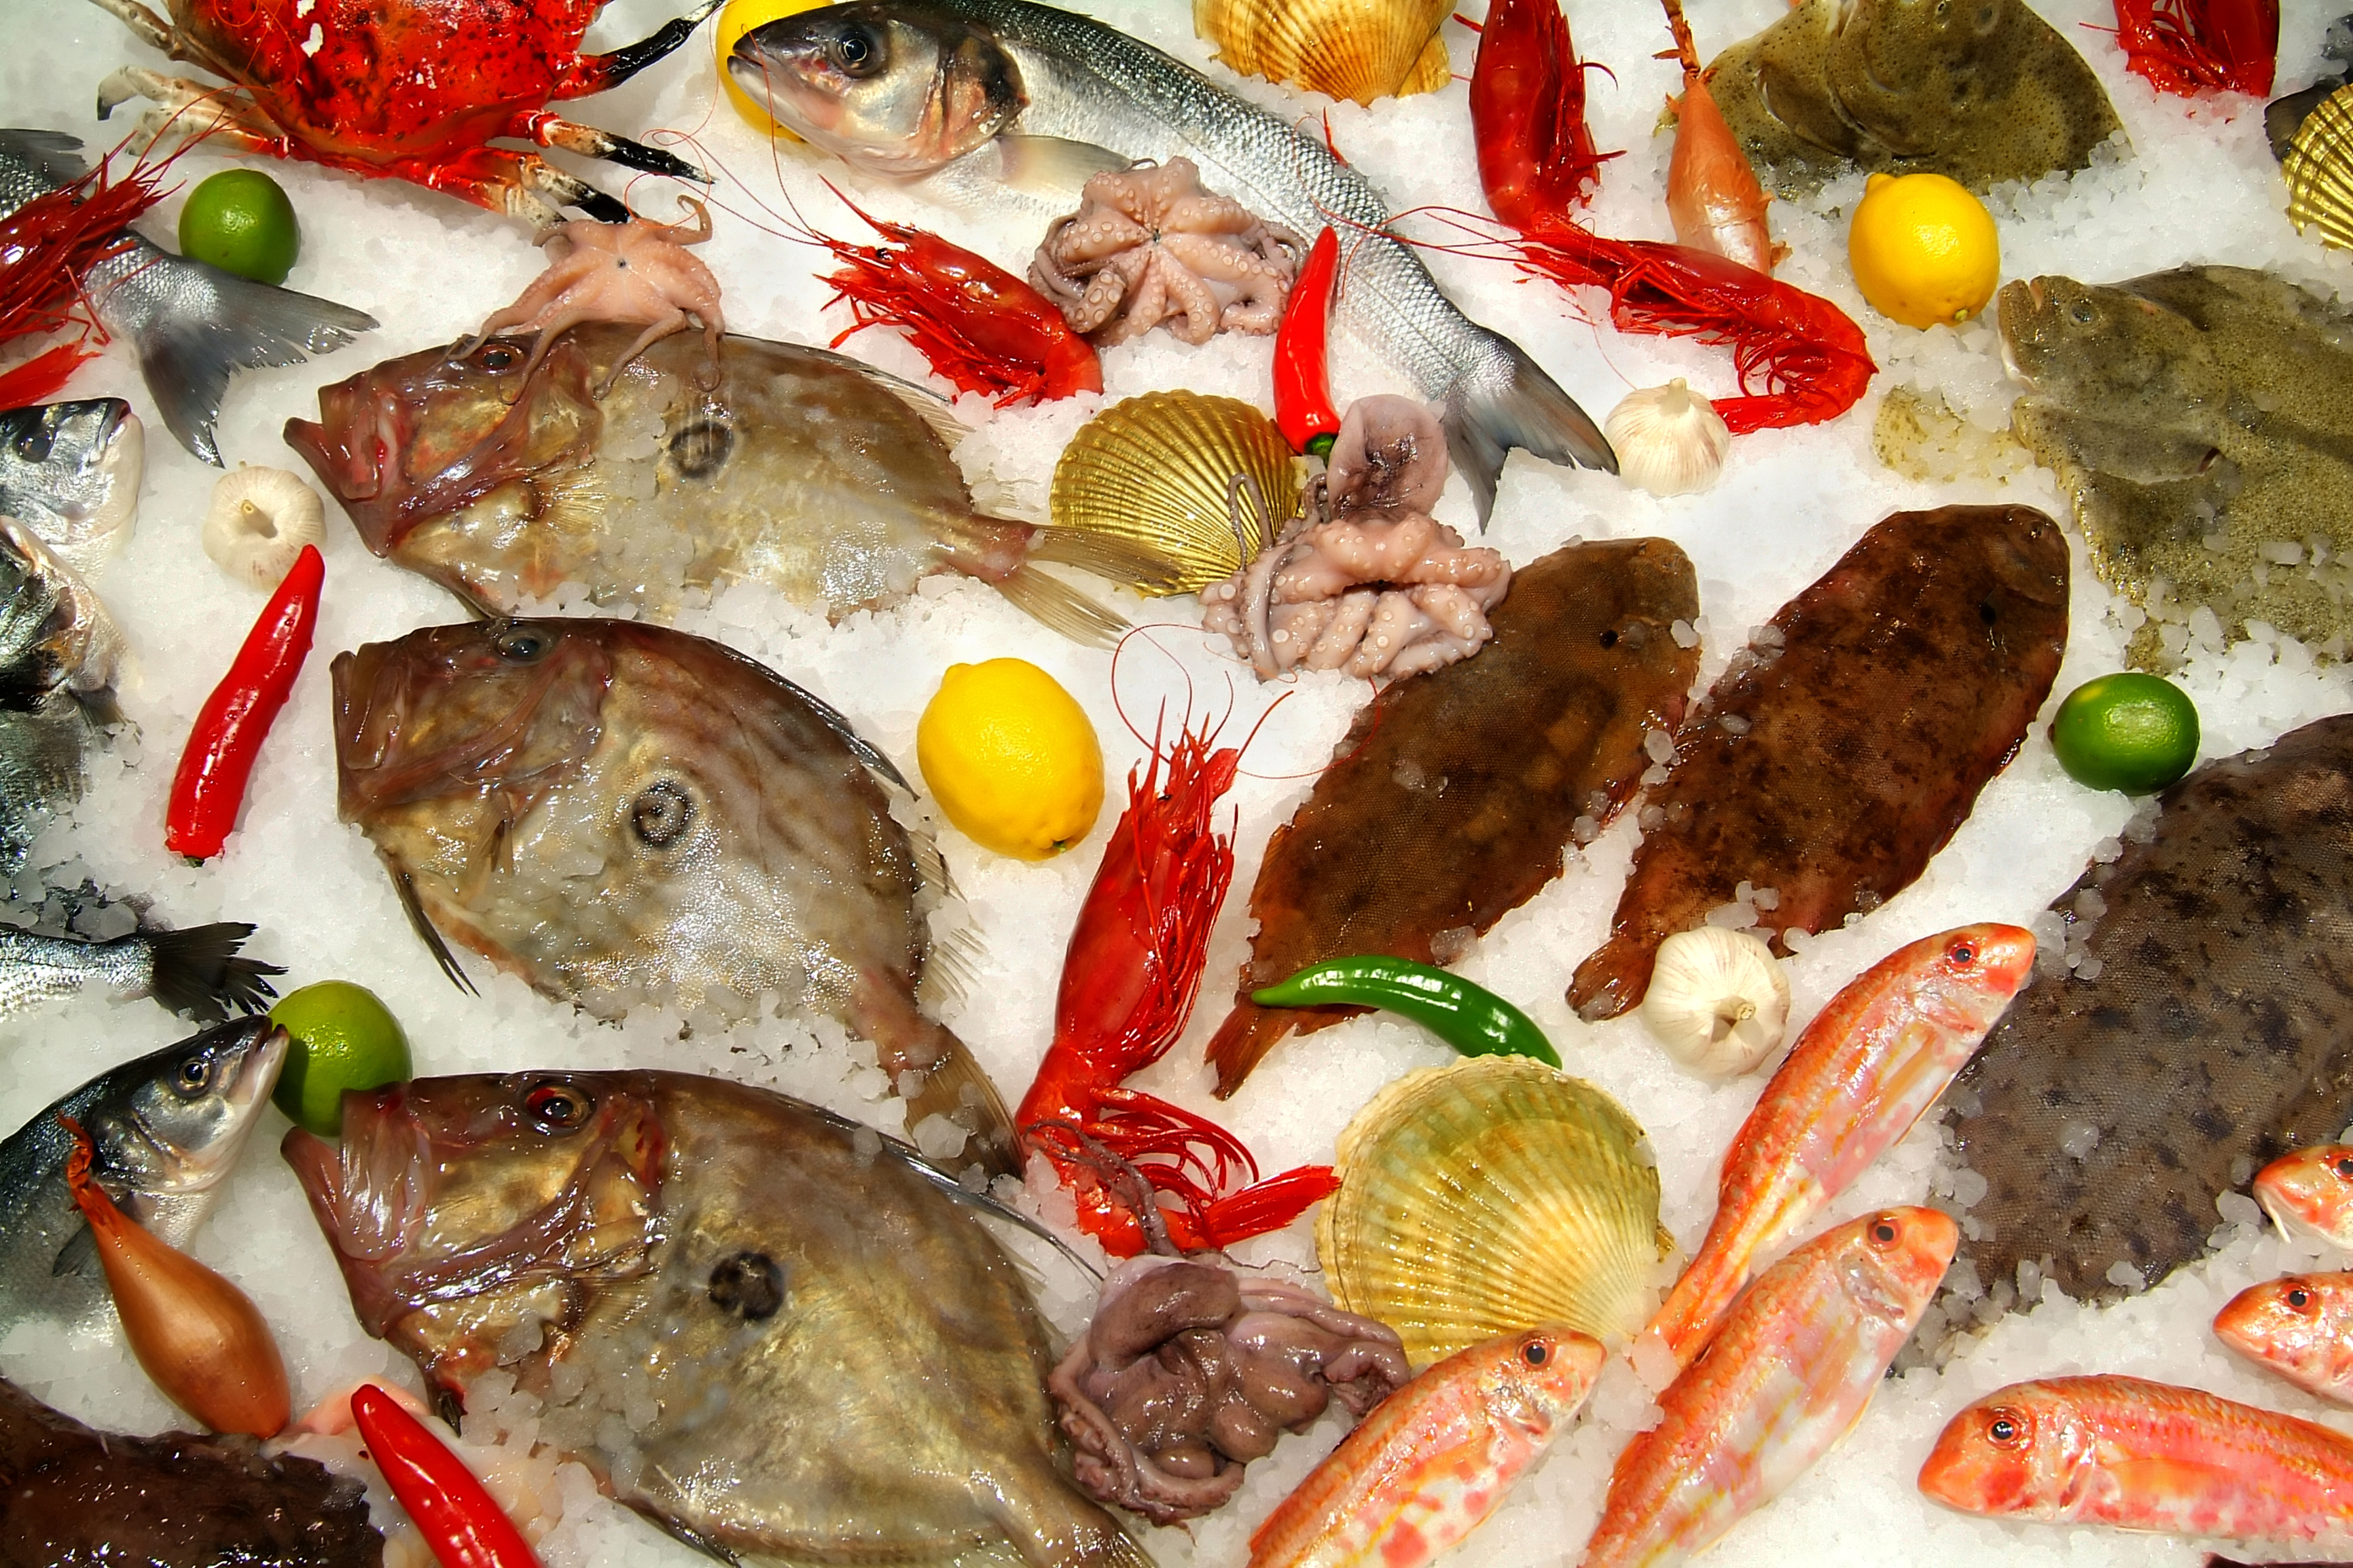 Various types of seafood presented on ice with lemons, limes, and peppers scattered about.